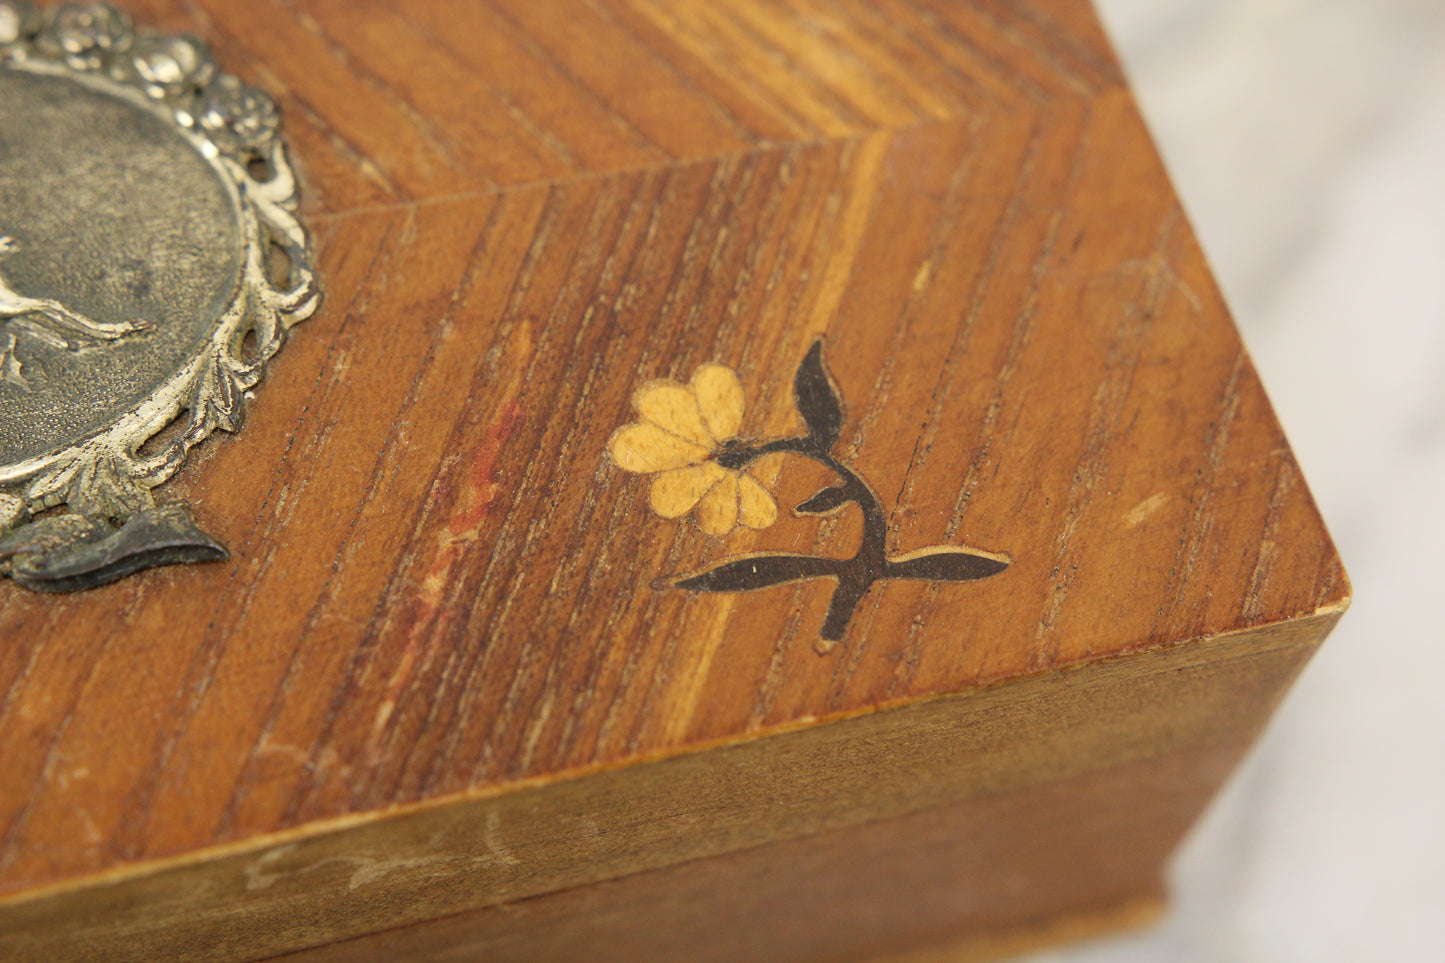 Small Wooden Storage Box with Tin Deer and Marquetry Inlaid Flowers - 7.5 x 3.75 x 2.5"